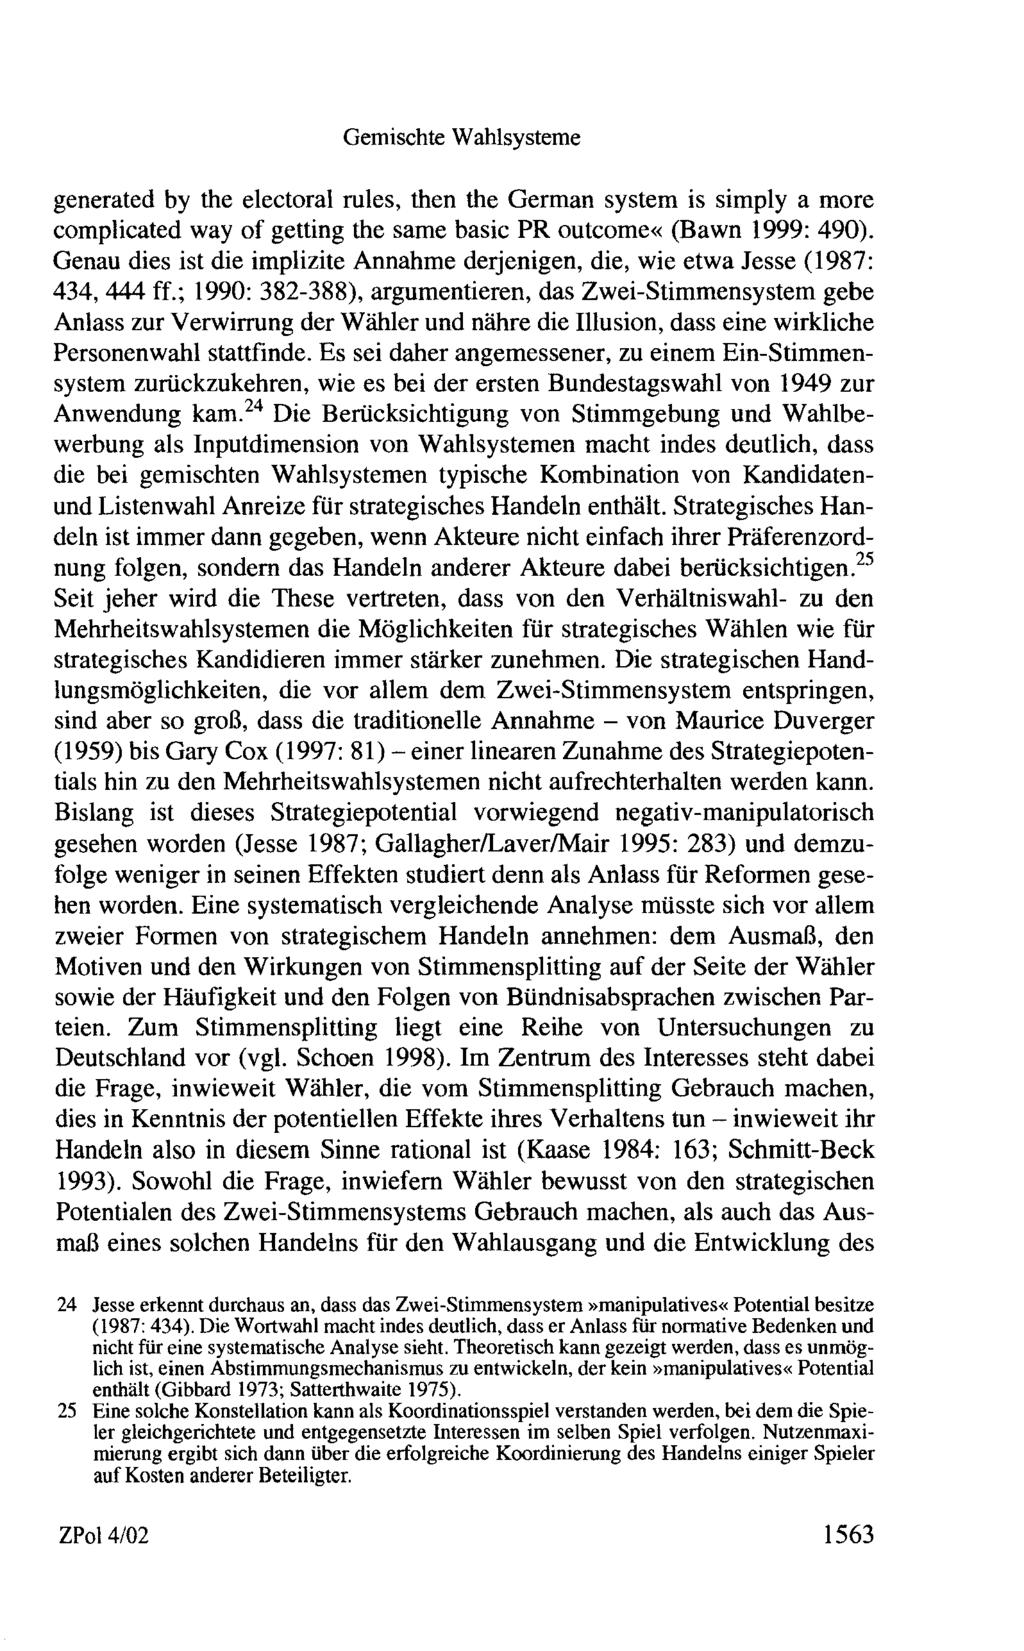 Gemischte Wahlsysteme generated by the electoral rules, then the German system is simply a more complicated way of getting the same basic PR outcome«(bawn 1999: 490).